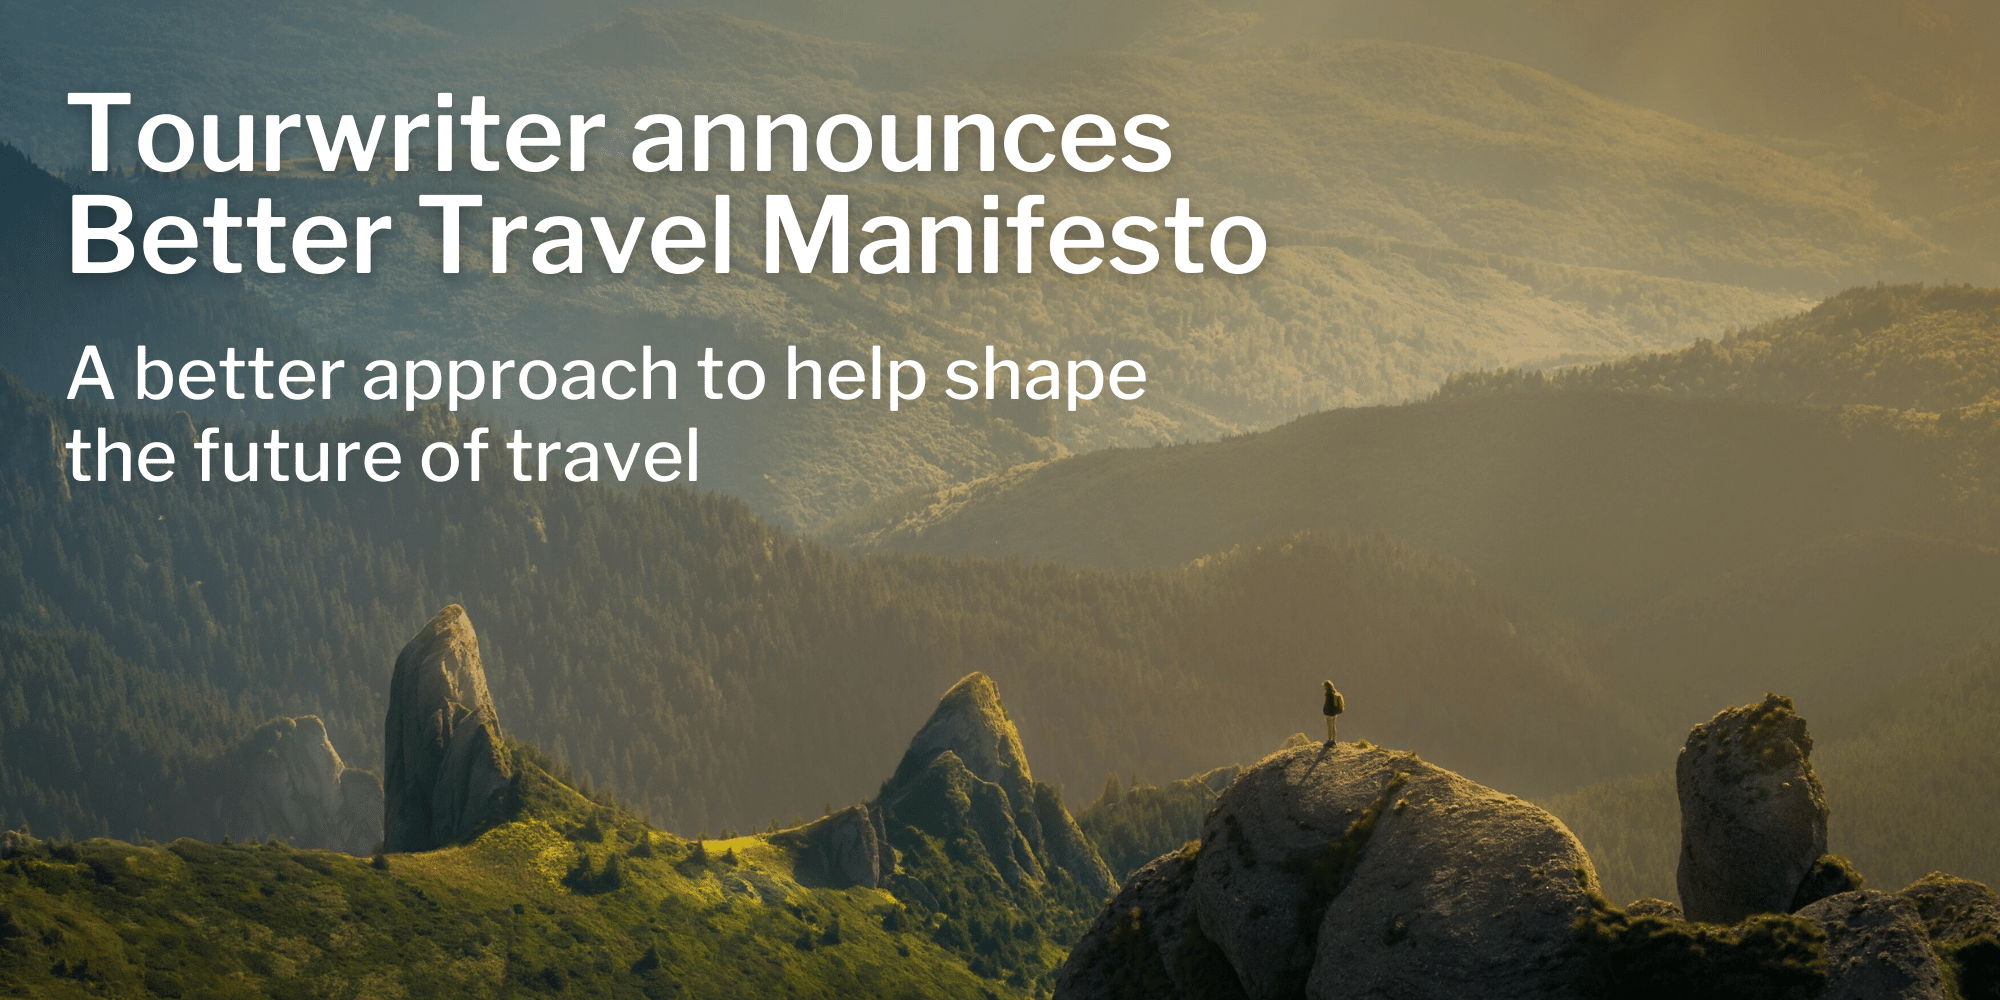 Tourwriter launches Better Travel Manifesto, a vision for a sustainable future for tourism